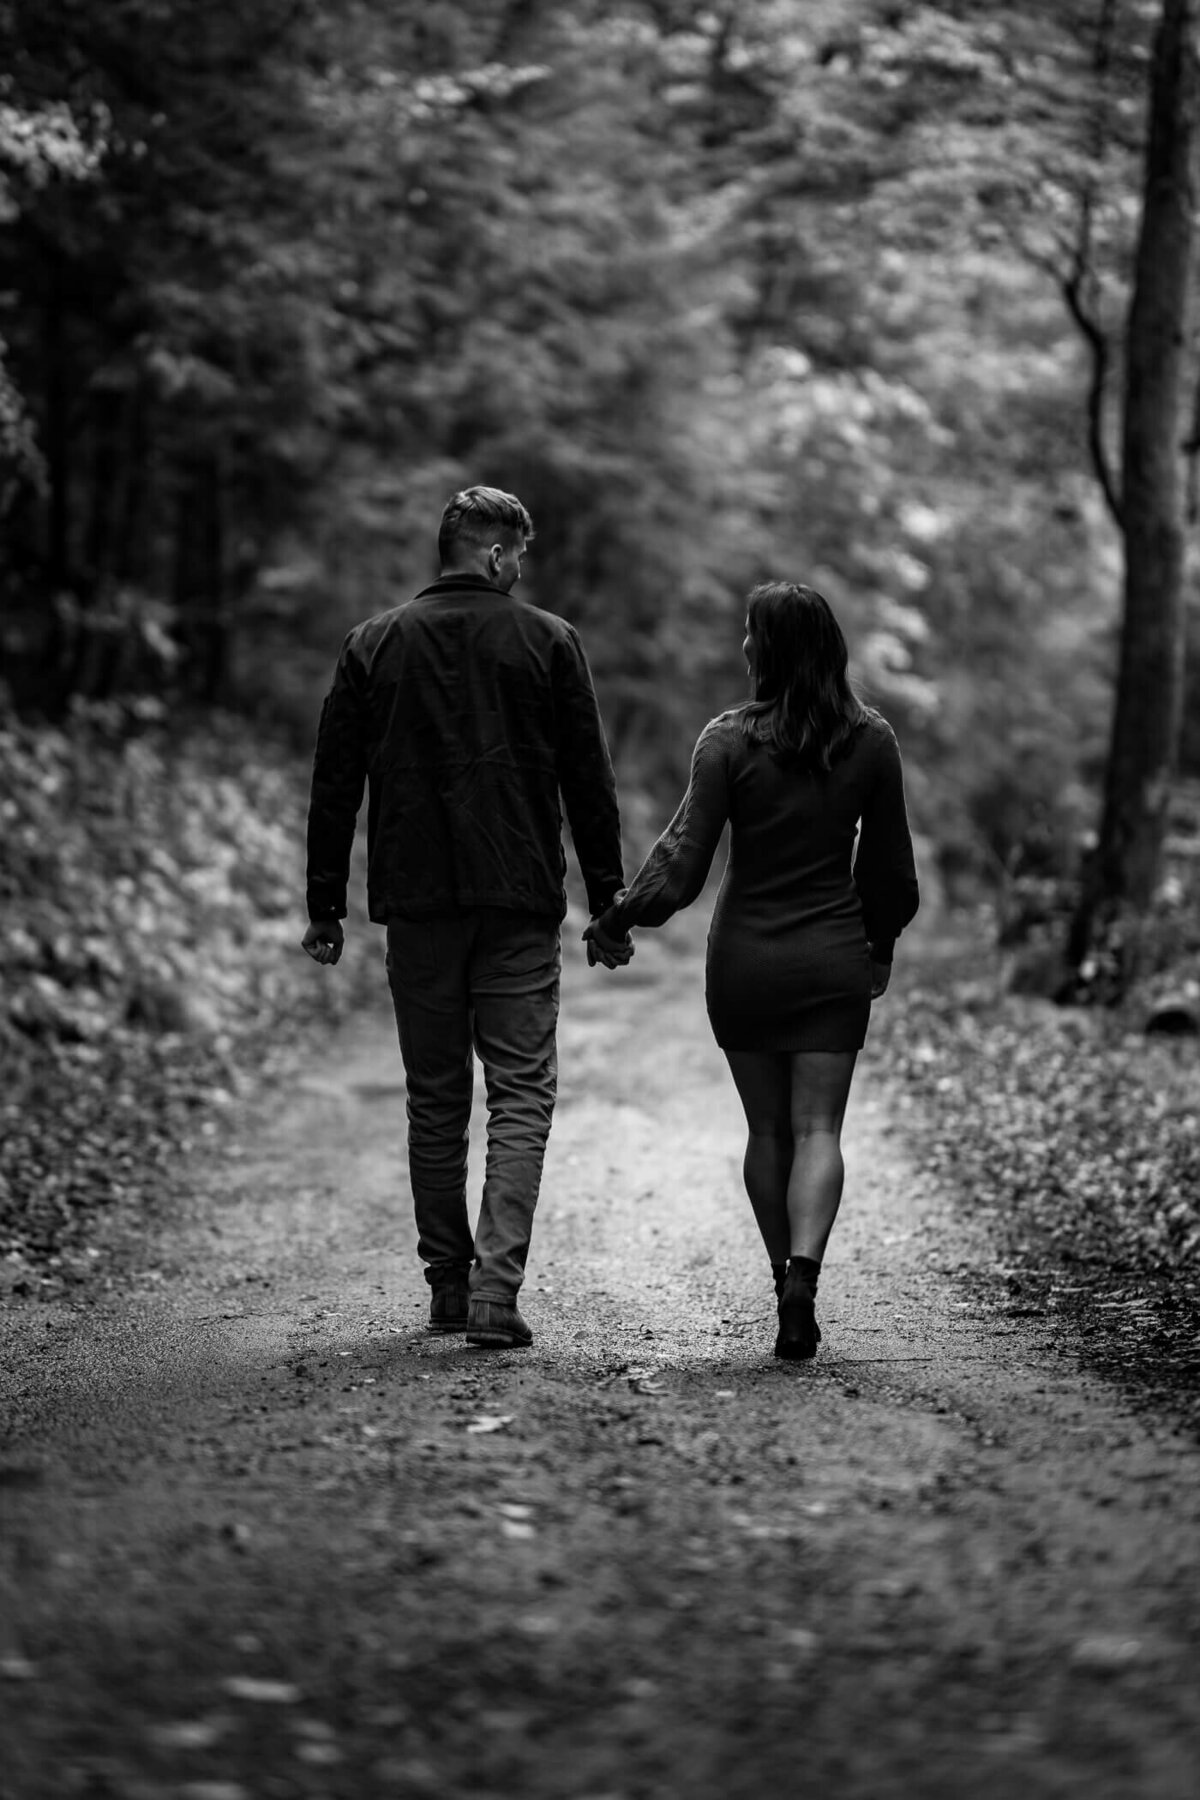 Black and White Pittsburgh engagement photography of a couple walking a holding hands down a dirt path. Captured during sunset at an engagement session at McConnell's Mill state park, PA